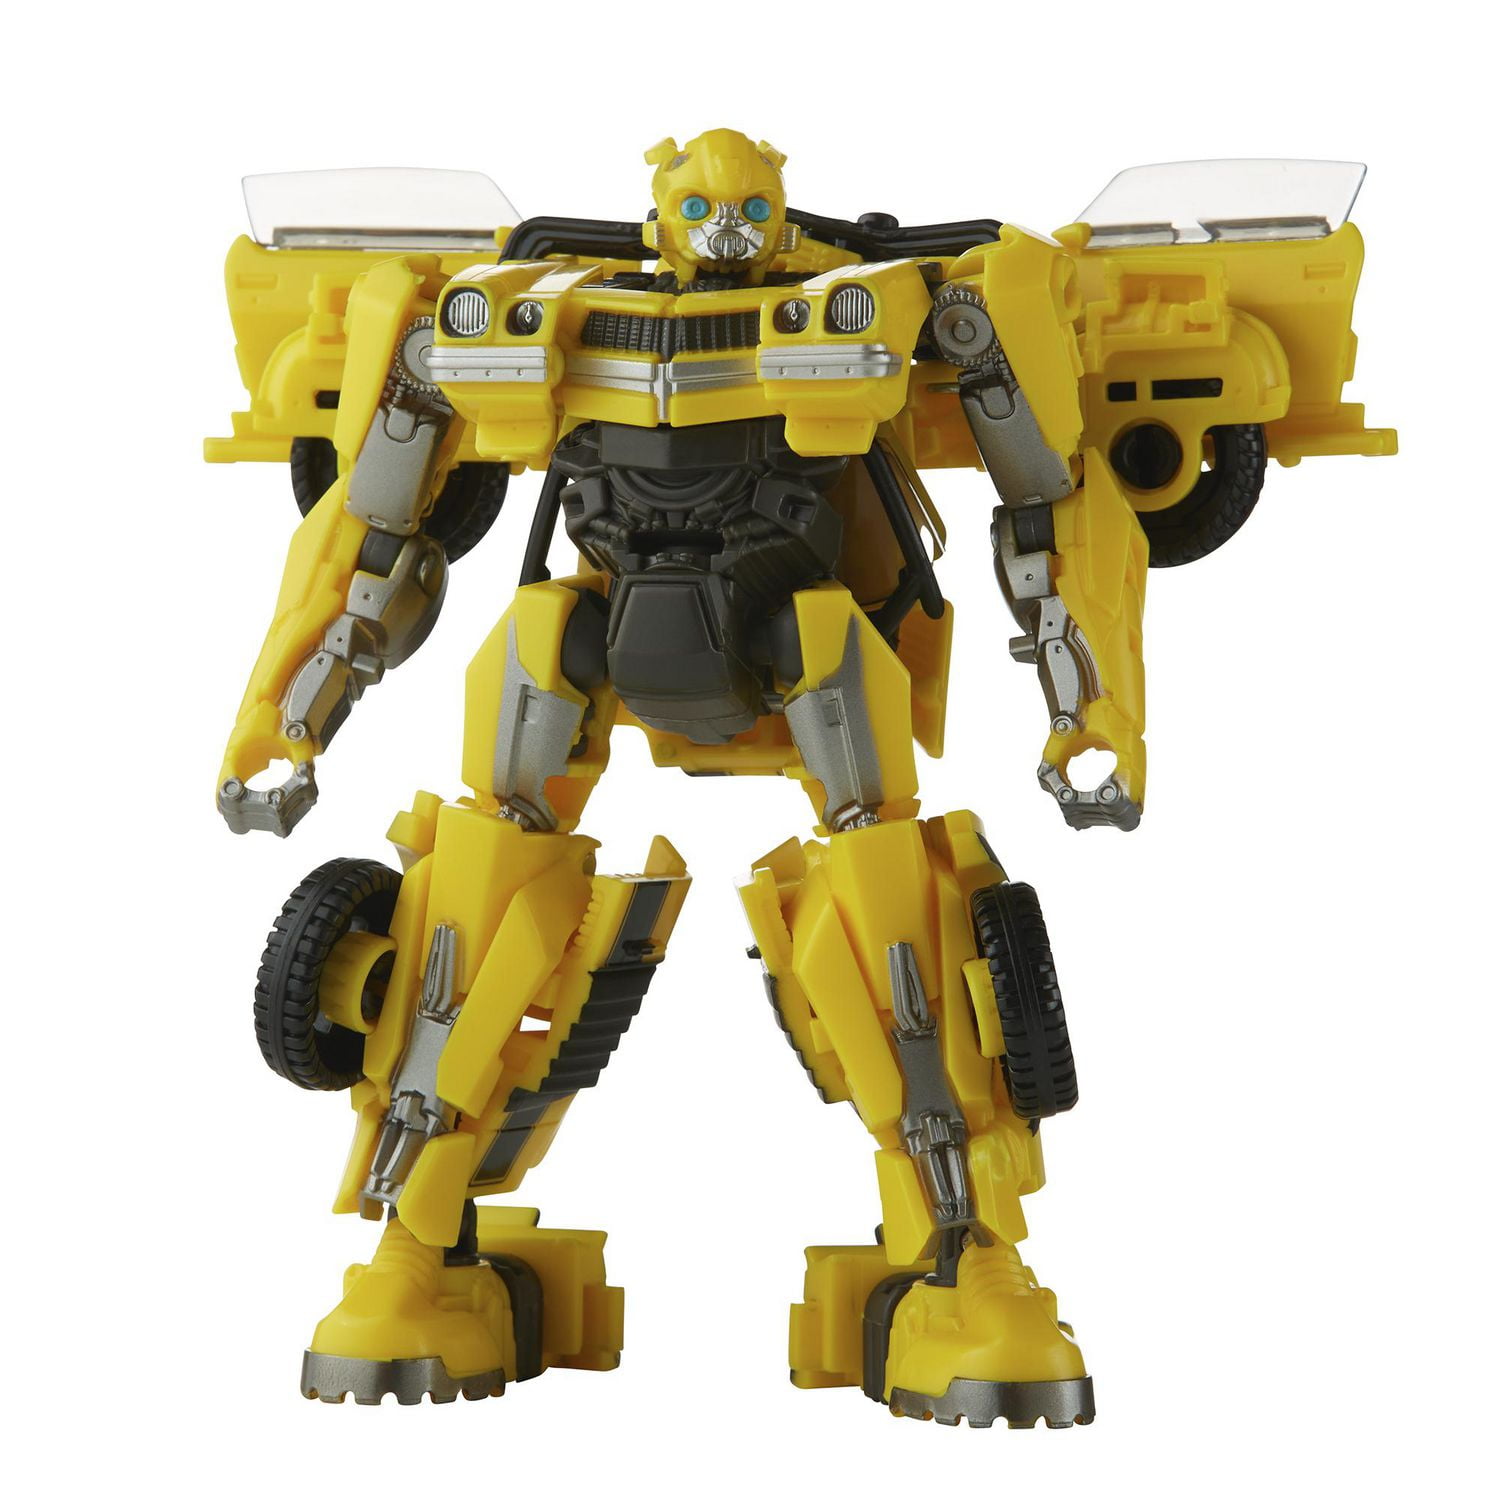 Transformers Toys Studio Series Deluxe Class 100 Bumblebee Toy